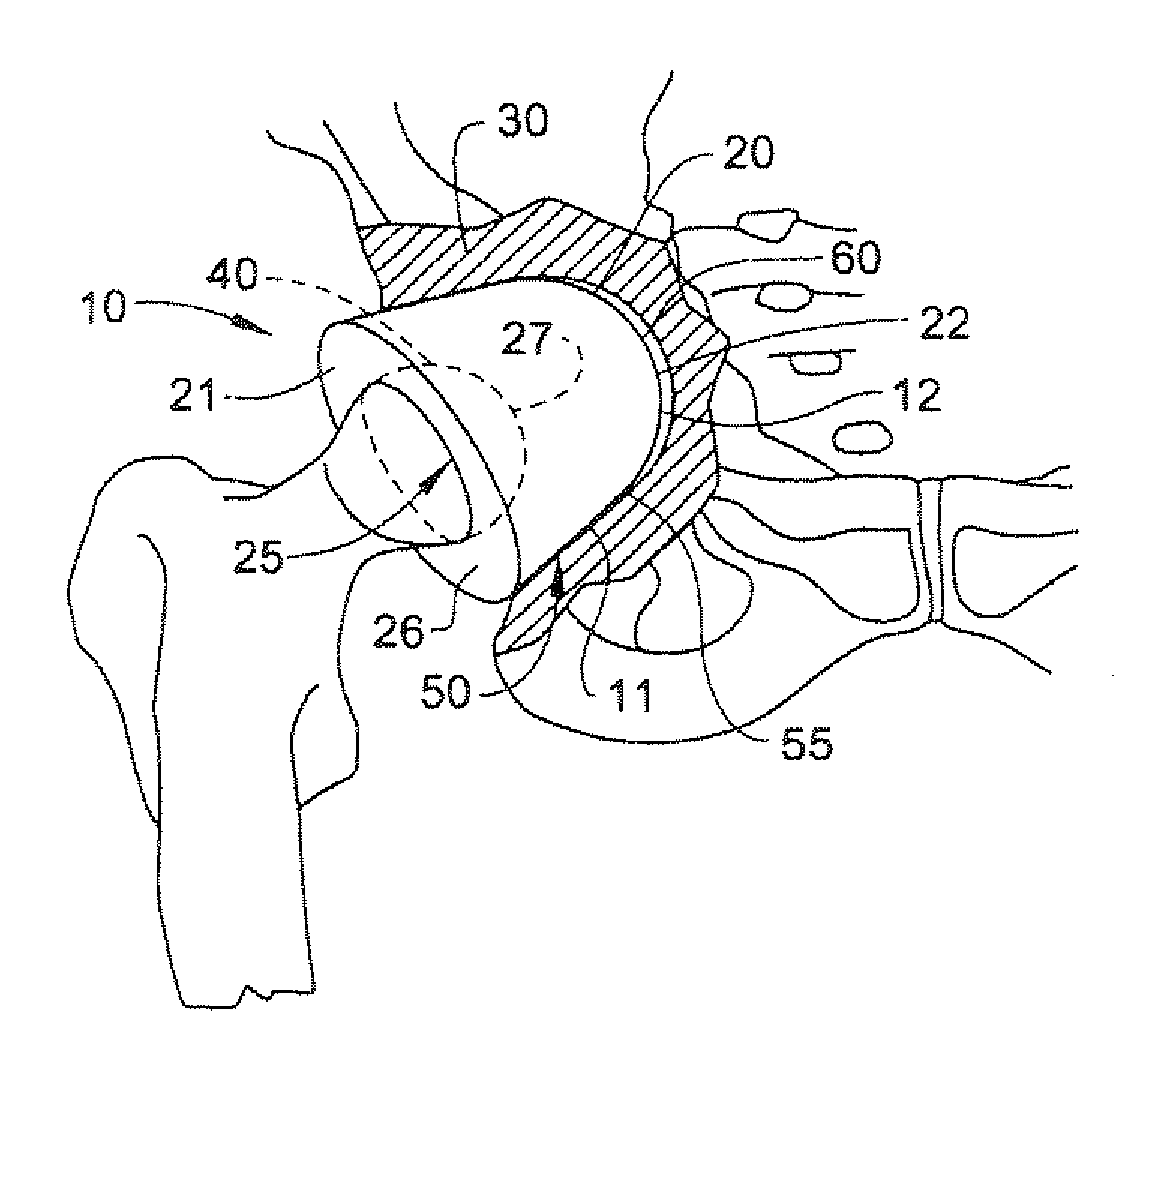 Acetabular component of total hip replacement assembly